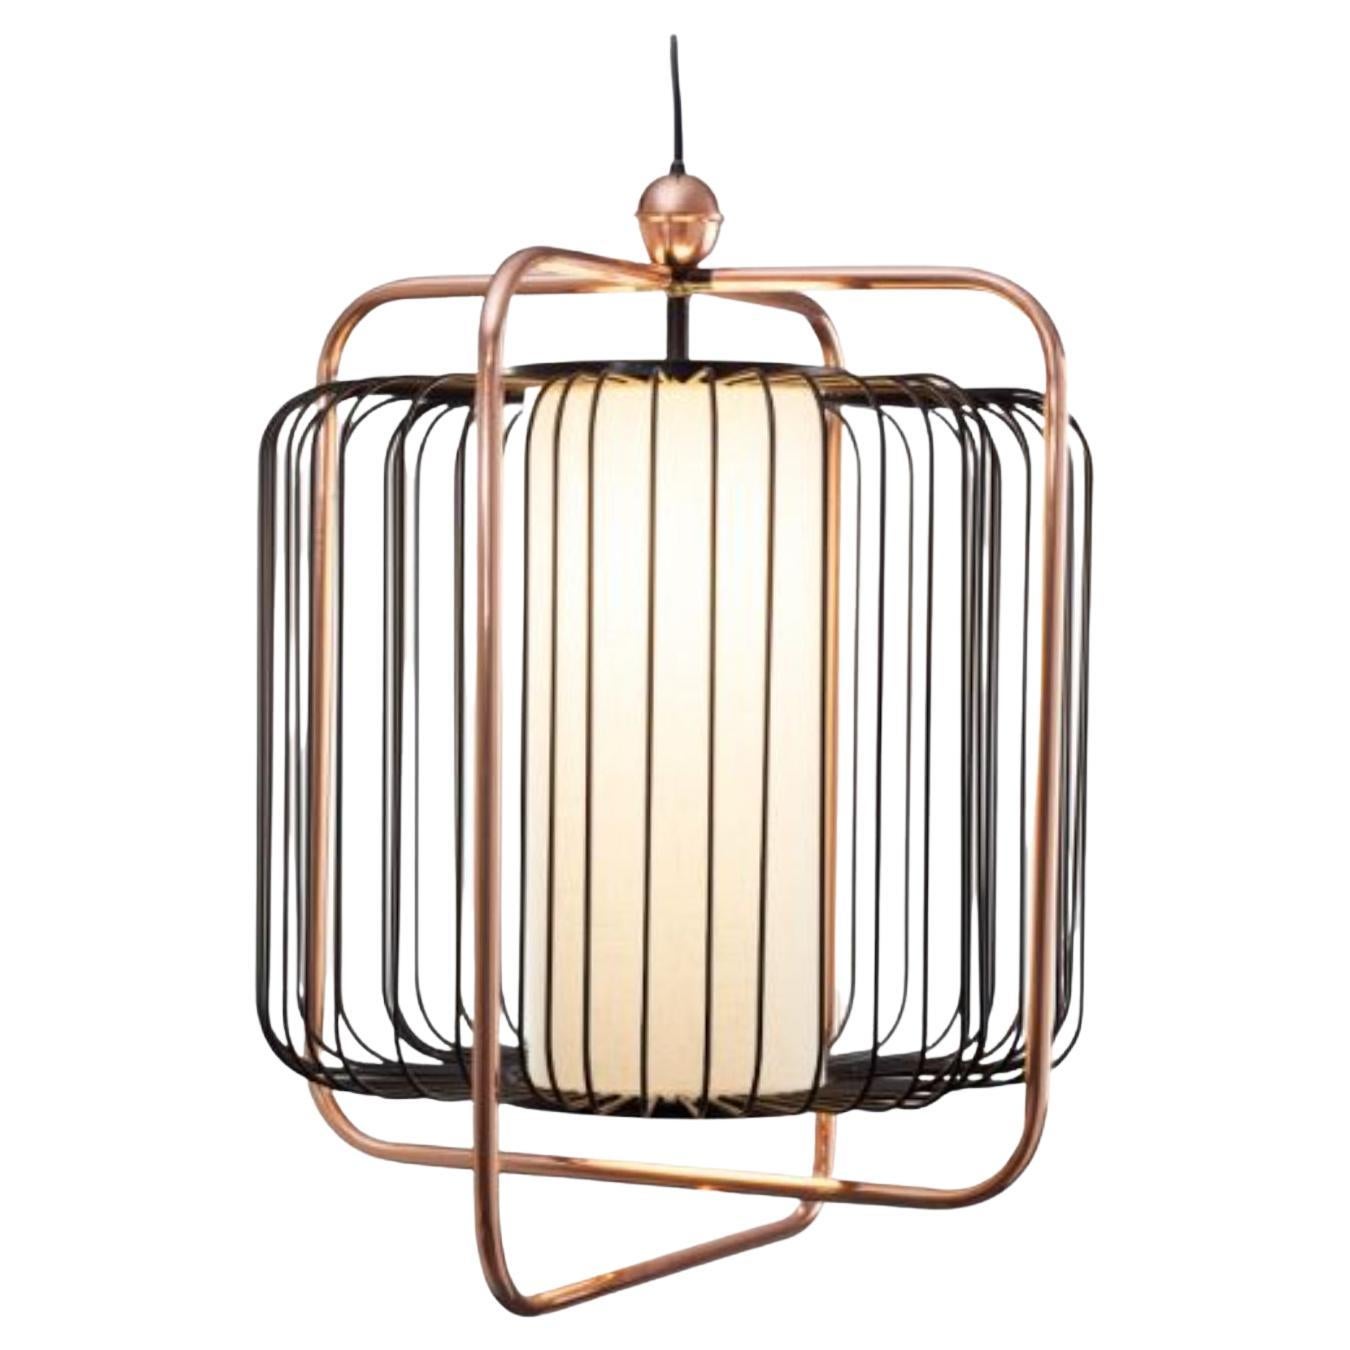 Copper and Black Jules Suspension Lamp by Dooq